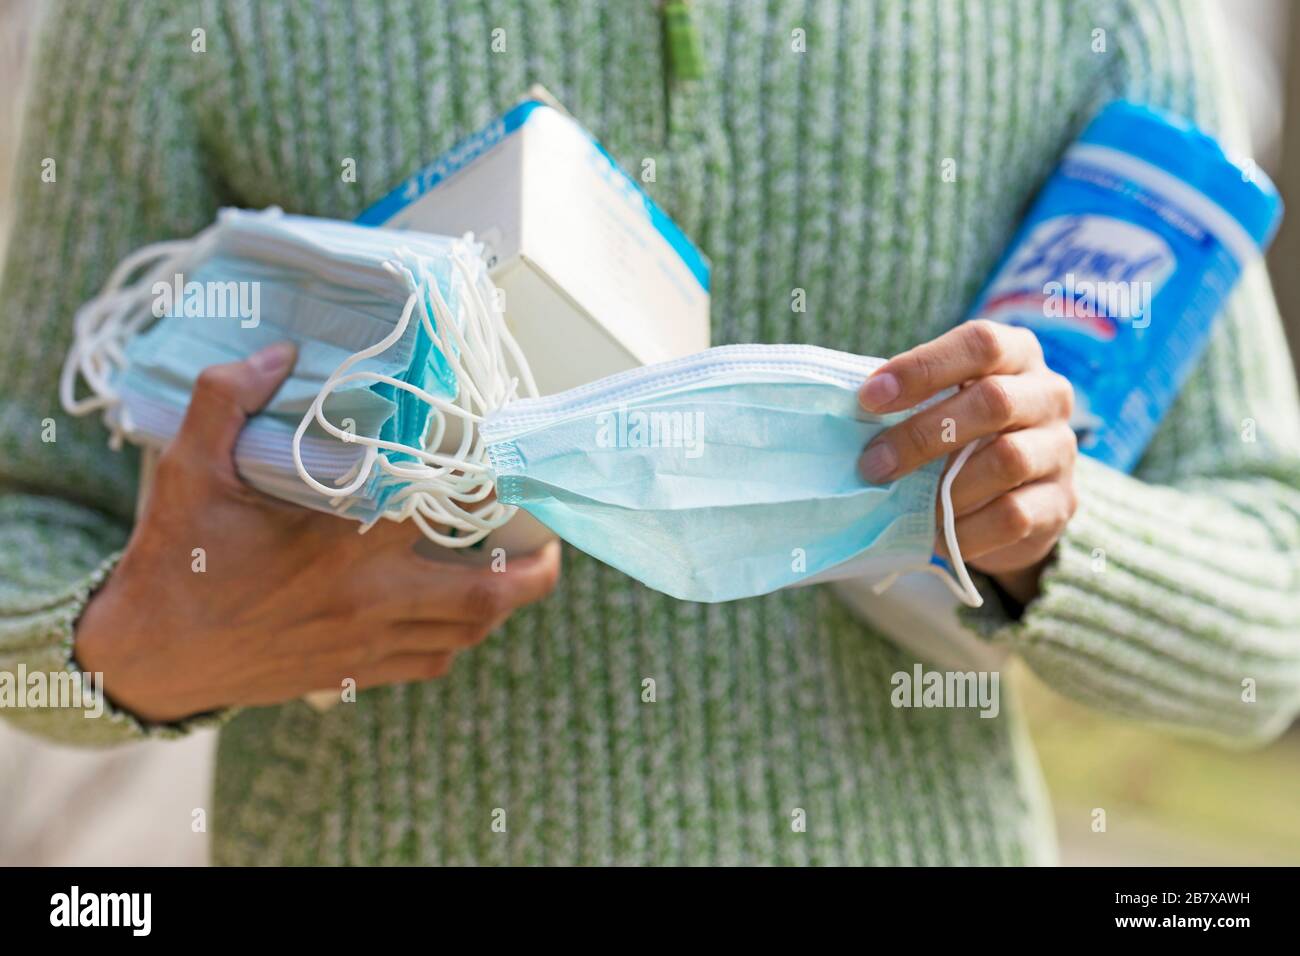 Holding Face Masks and Disinfecting Wipes, to protect from COVID-19, Coronavirus infection Stock Photo